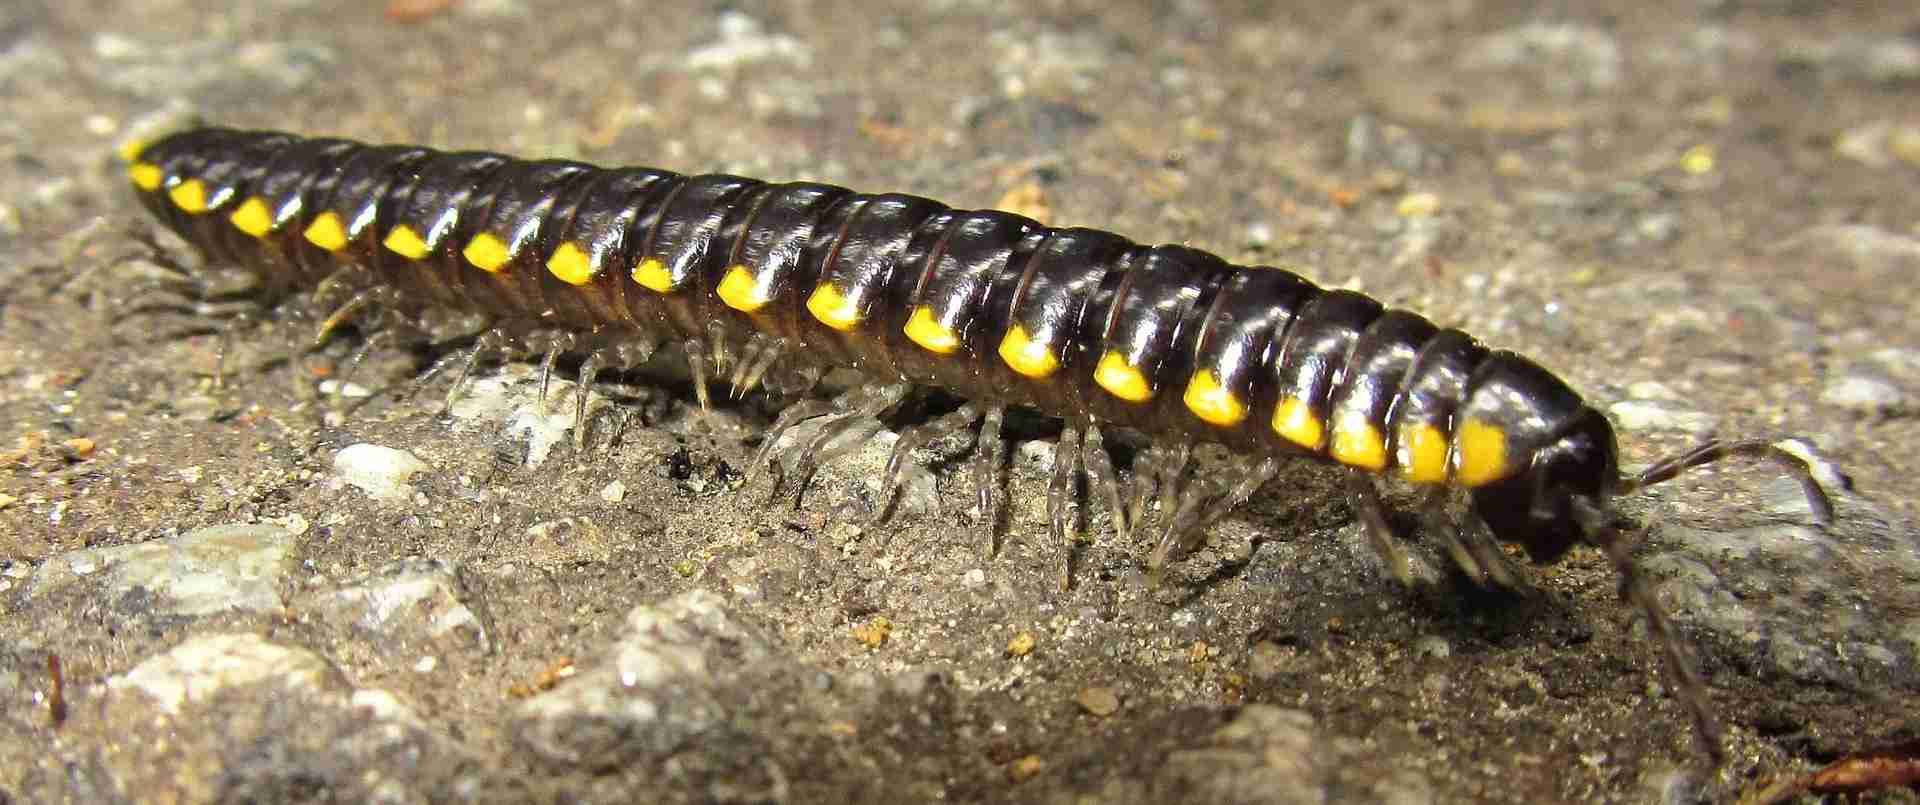 read about where do centipedes live